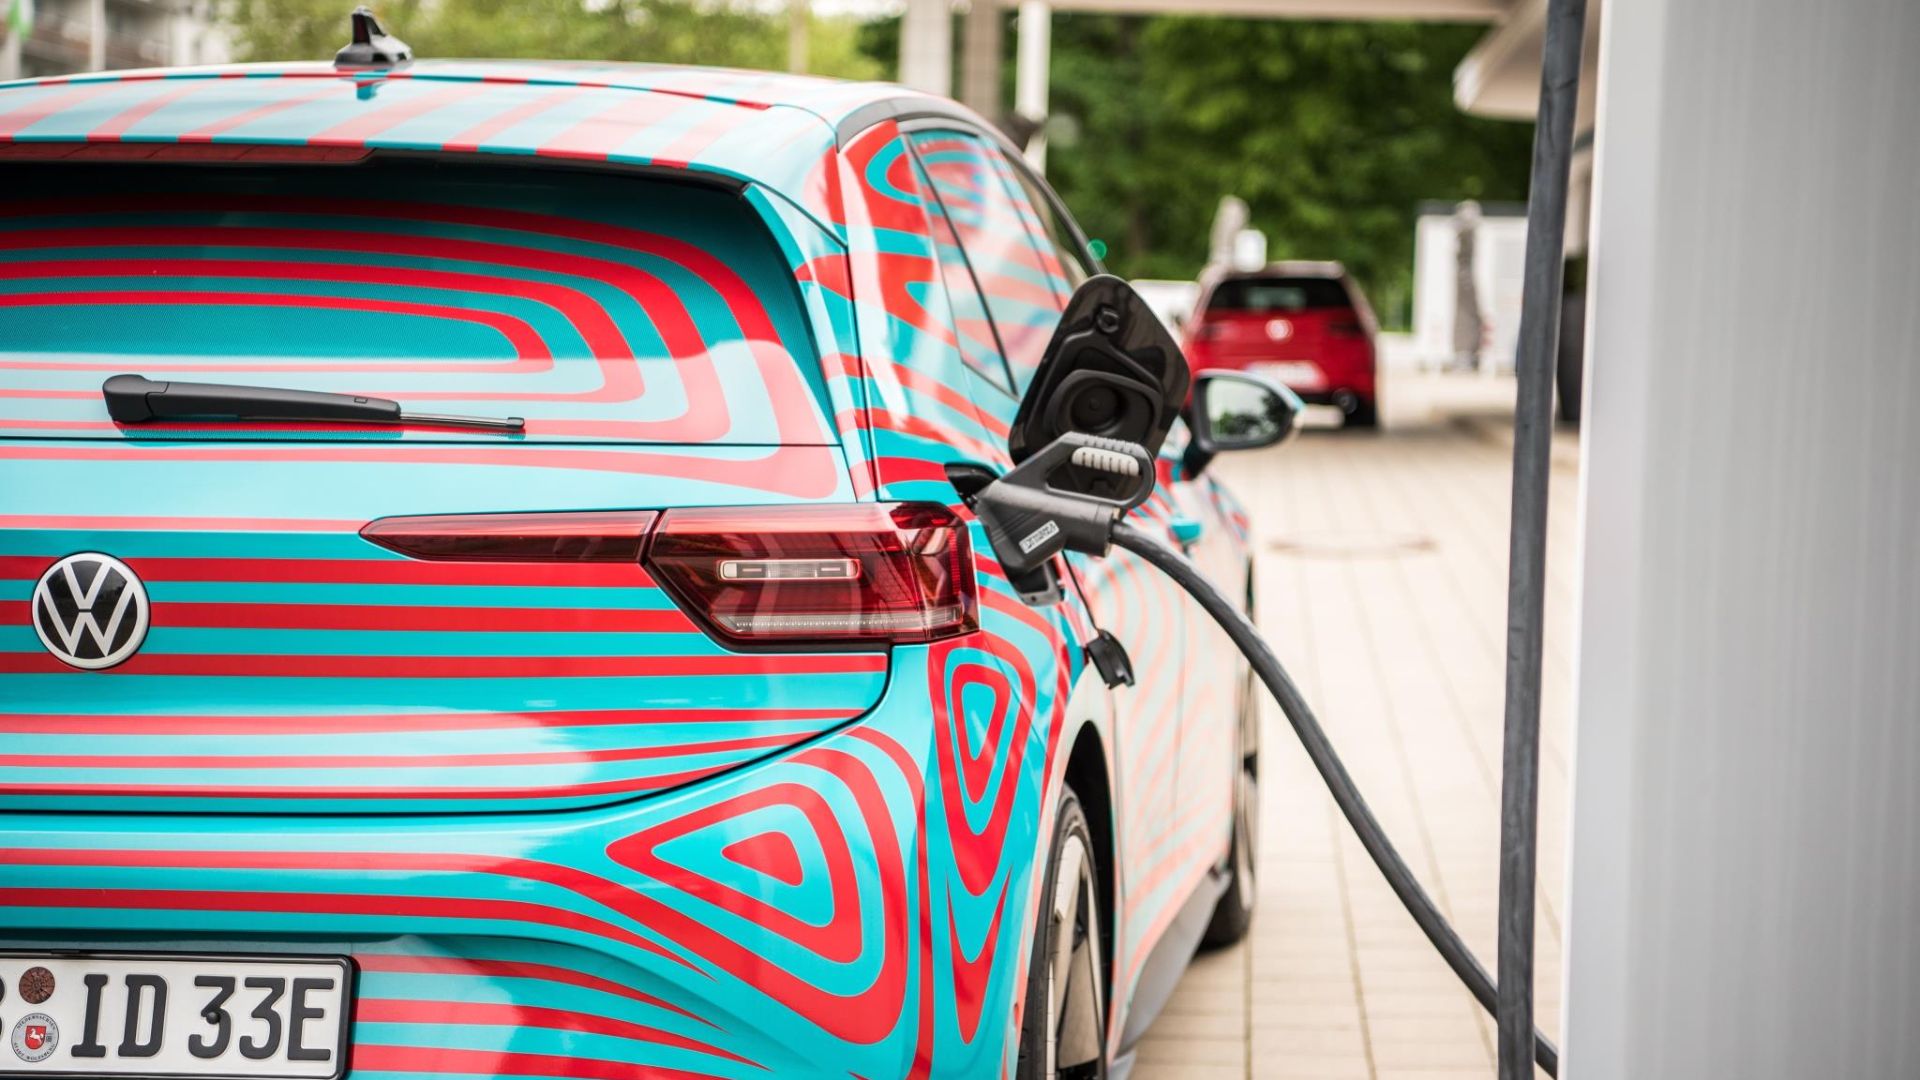 Future electric cars could charge in 10 minutes